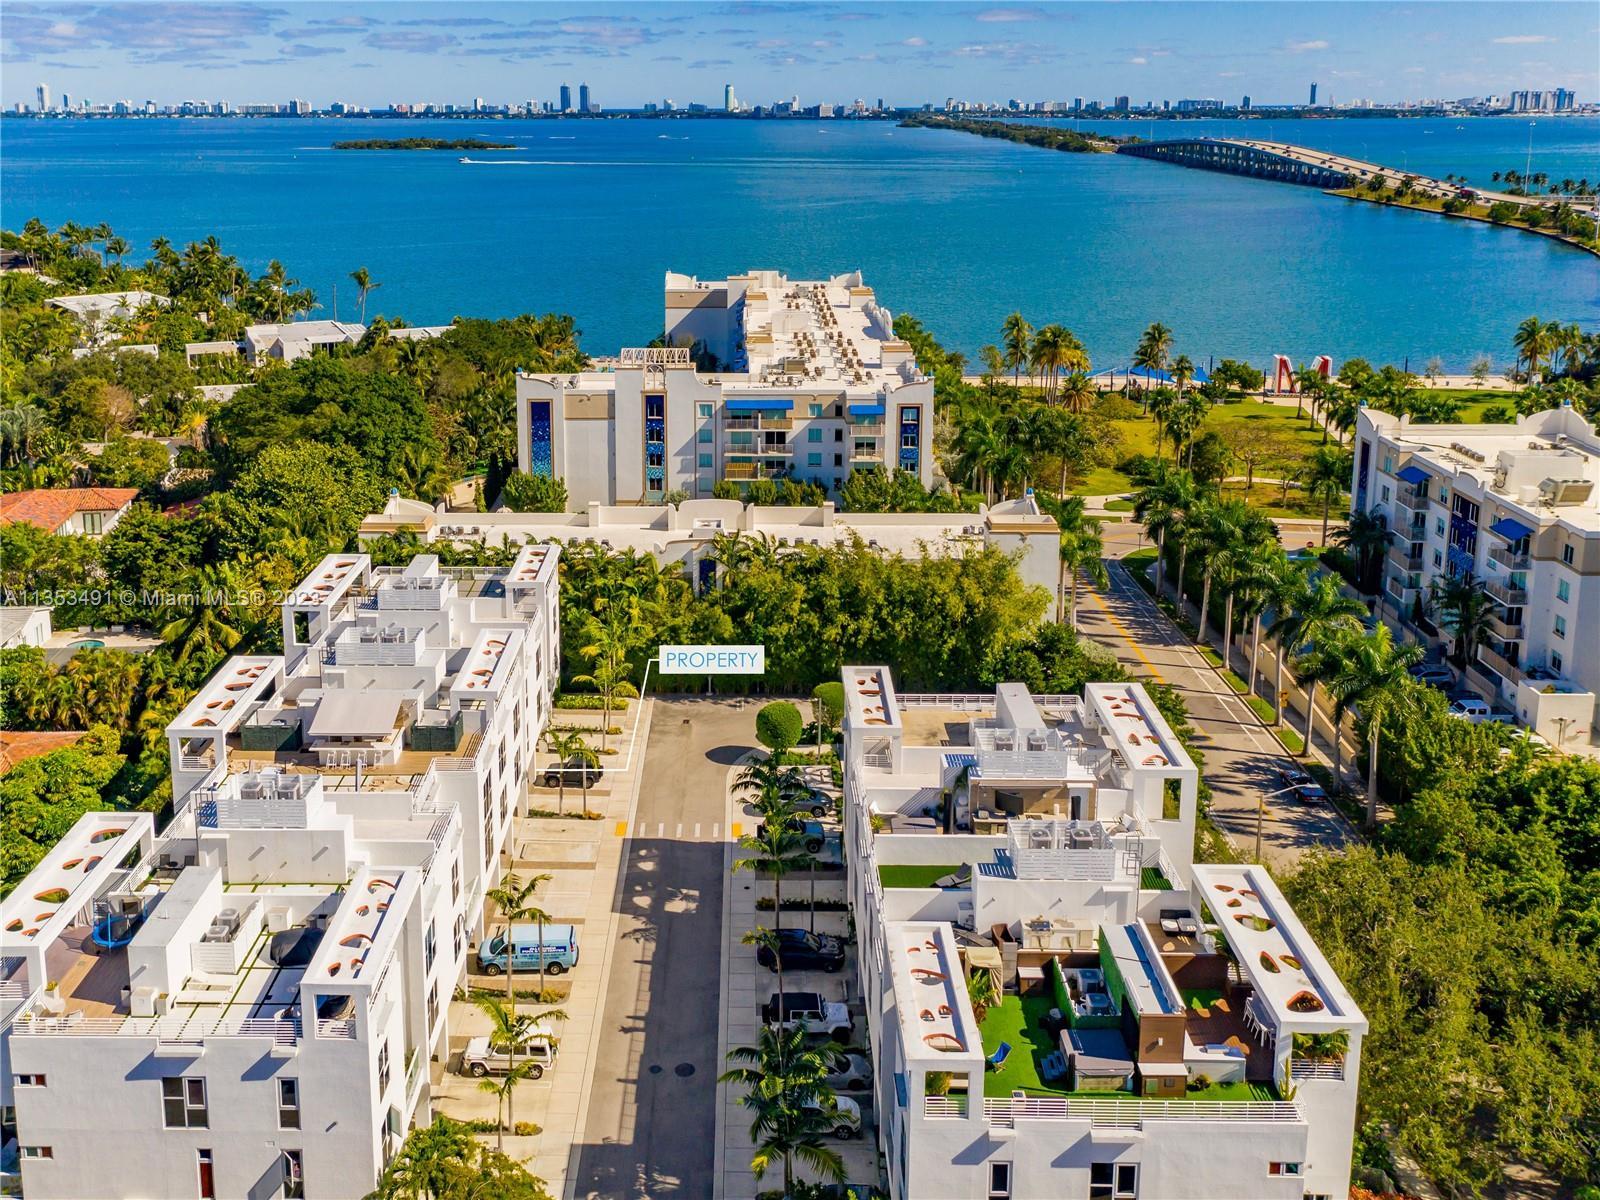 ONE BAY RESIDENCES, a gated residential enclave of 38 modern, multi-story luxury townhouses in the M